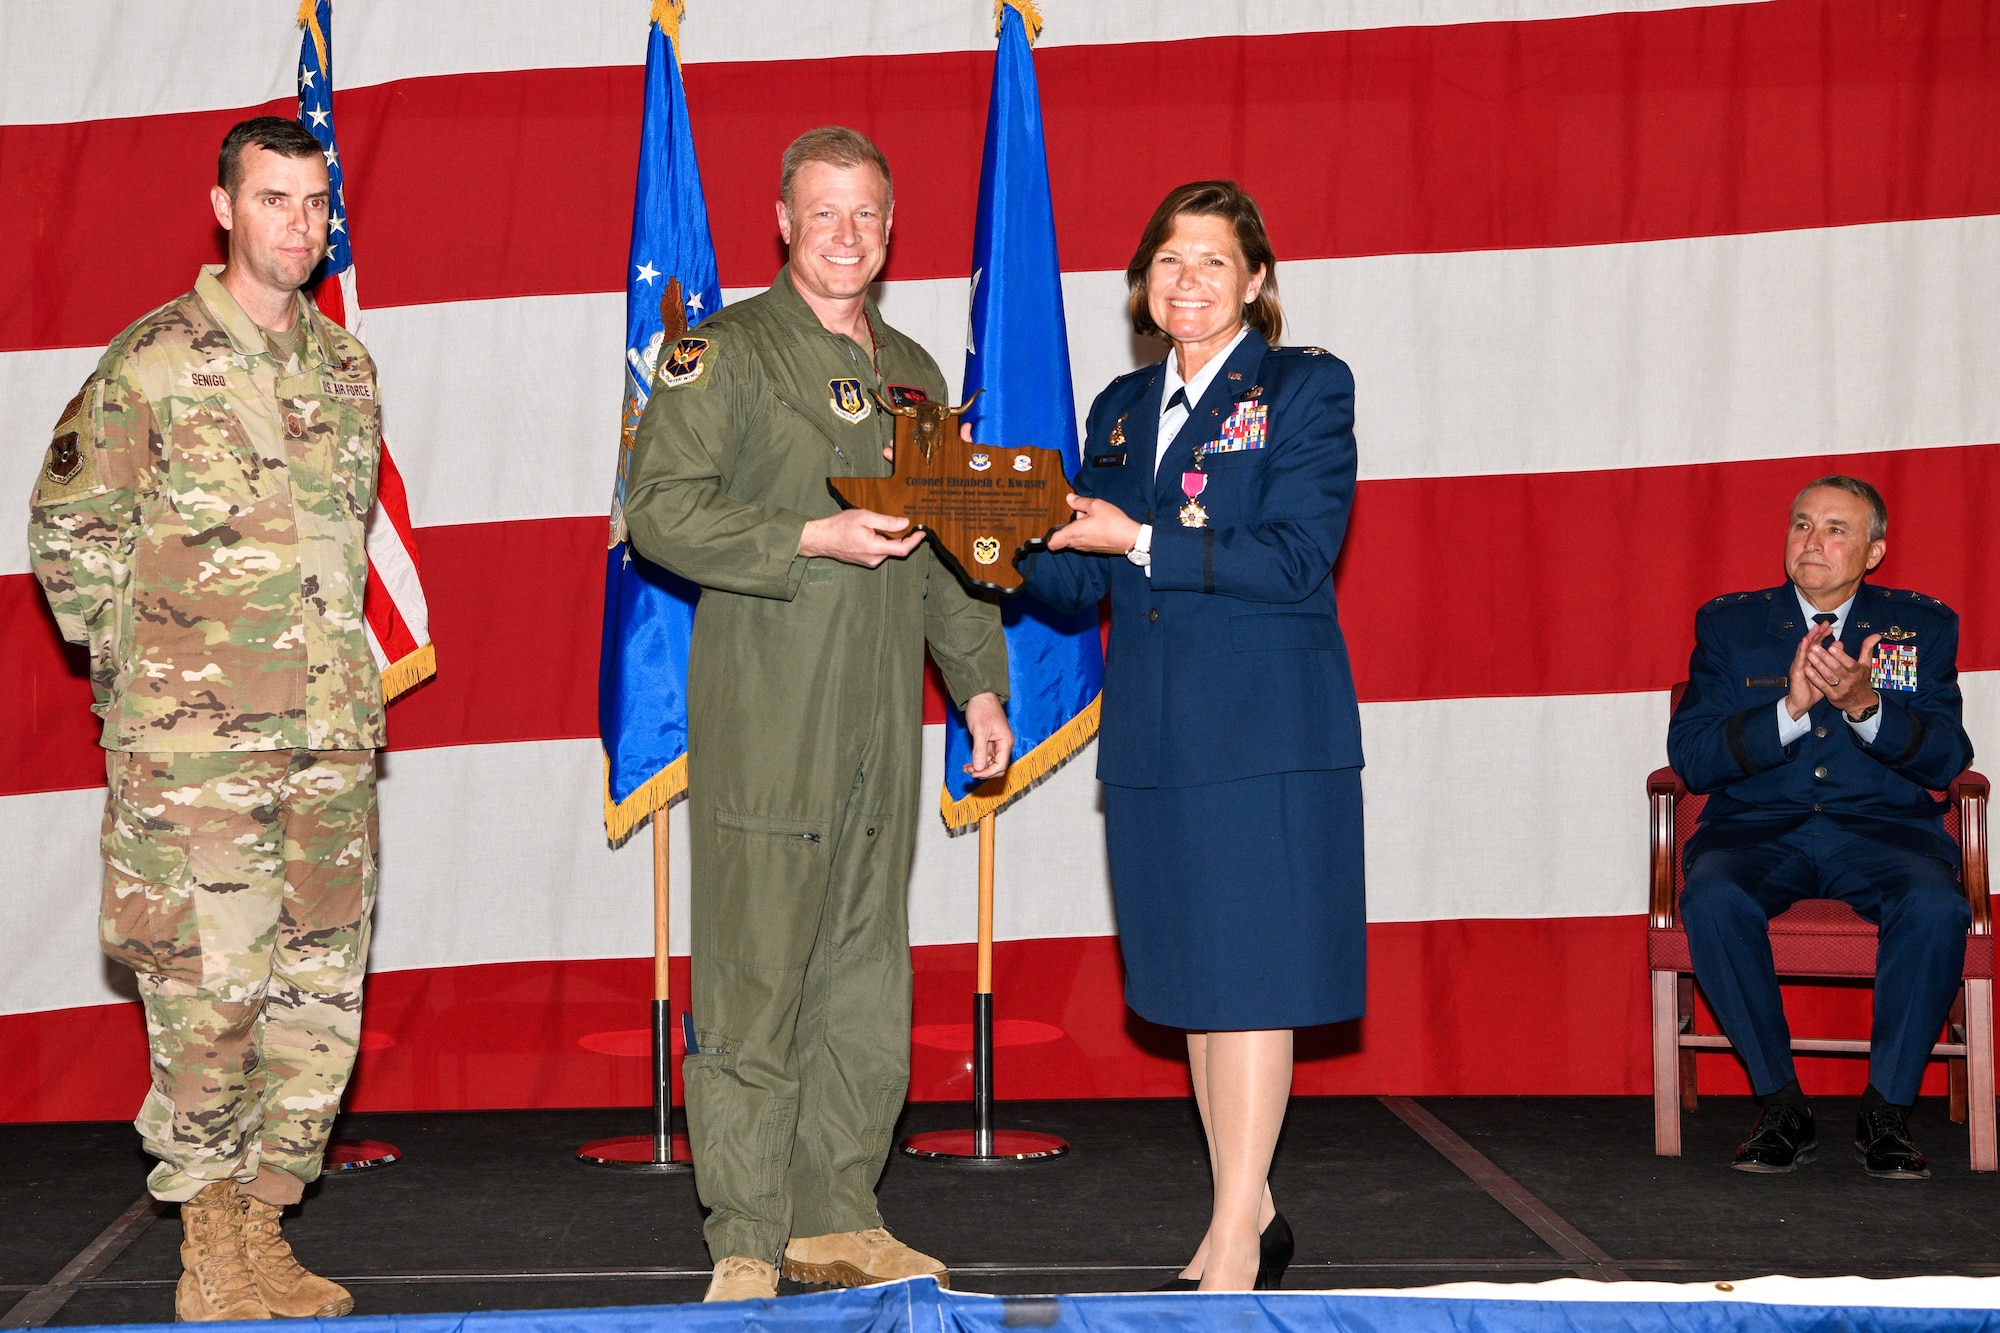 Colonel Elizabeth "Beth" Kwasny accepts and award from Colonel Allen Duckworth, commander of the 301st Fighter Wing, during a retirement ceremony on Saturday, April 30, 2022 at the Naval Air Station Joint Reserve Base Fort Worth, Texas. Kwasny served 31 years in the United States Air Force, both on Active Duty and as a traditional reservist.